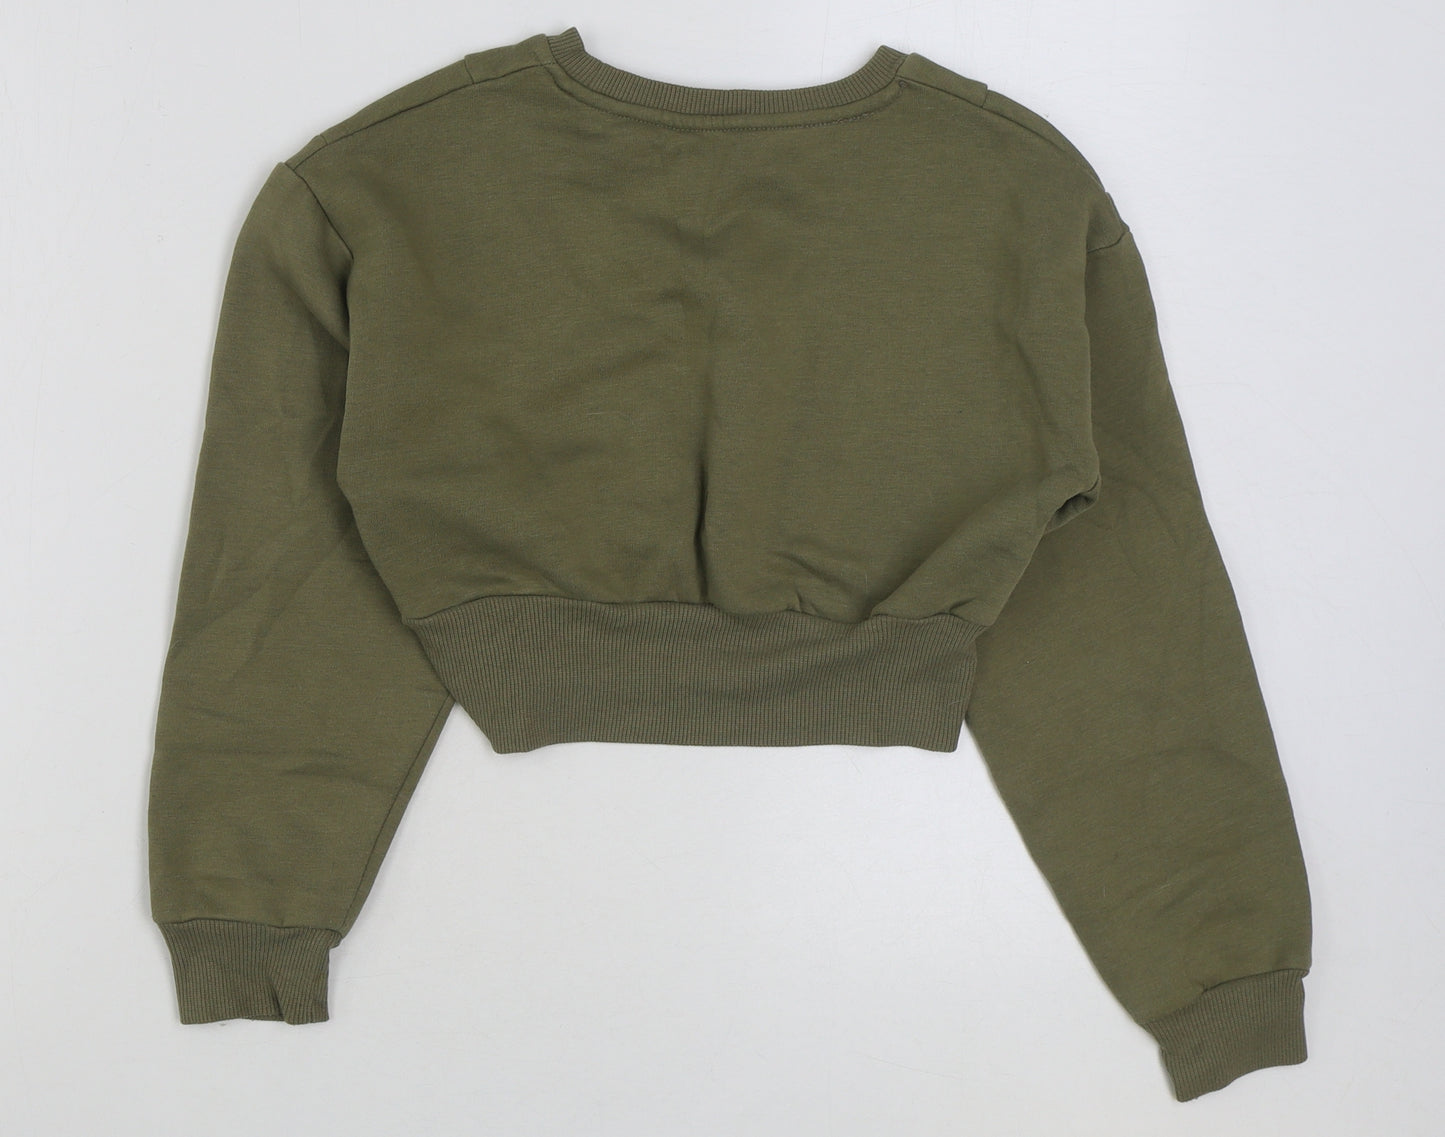 Matalan Girls Green Polyester Pullover Sweatshirt Size 11 Years Pullover - Always be yourself